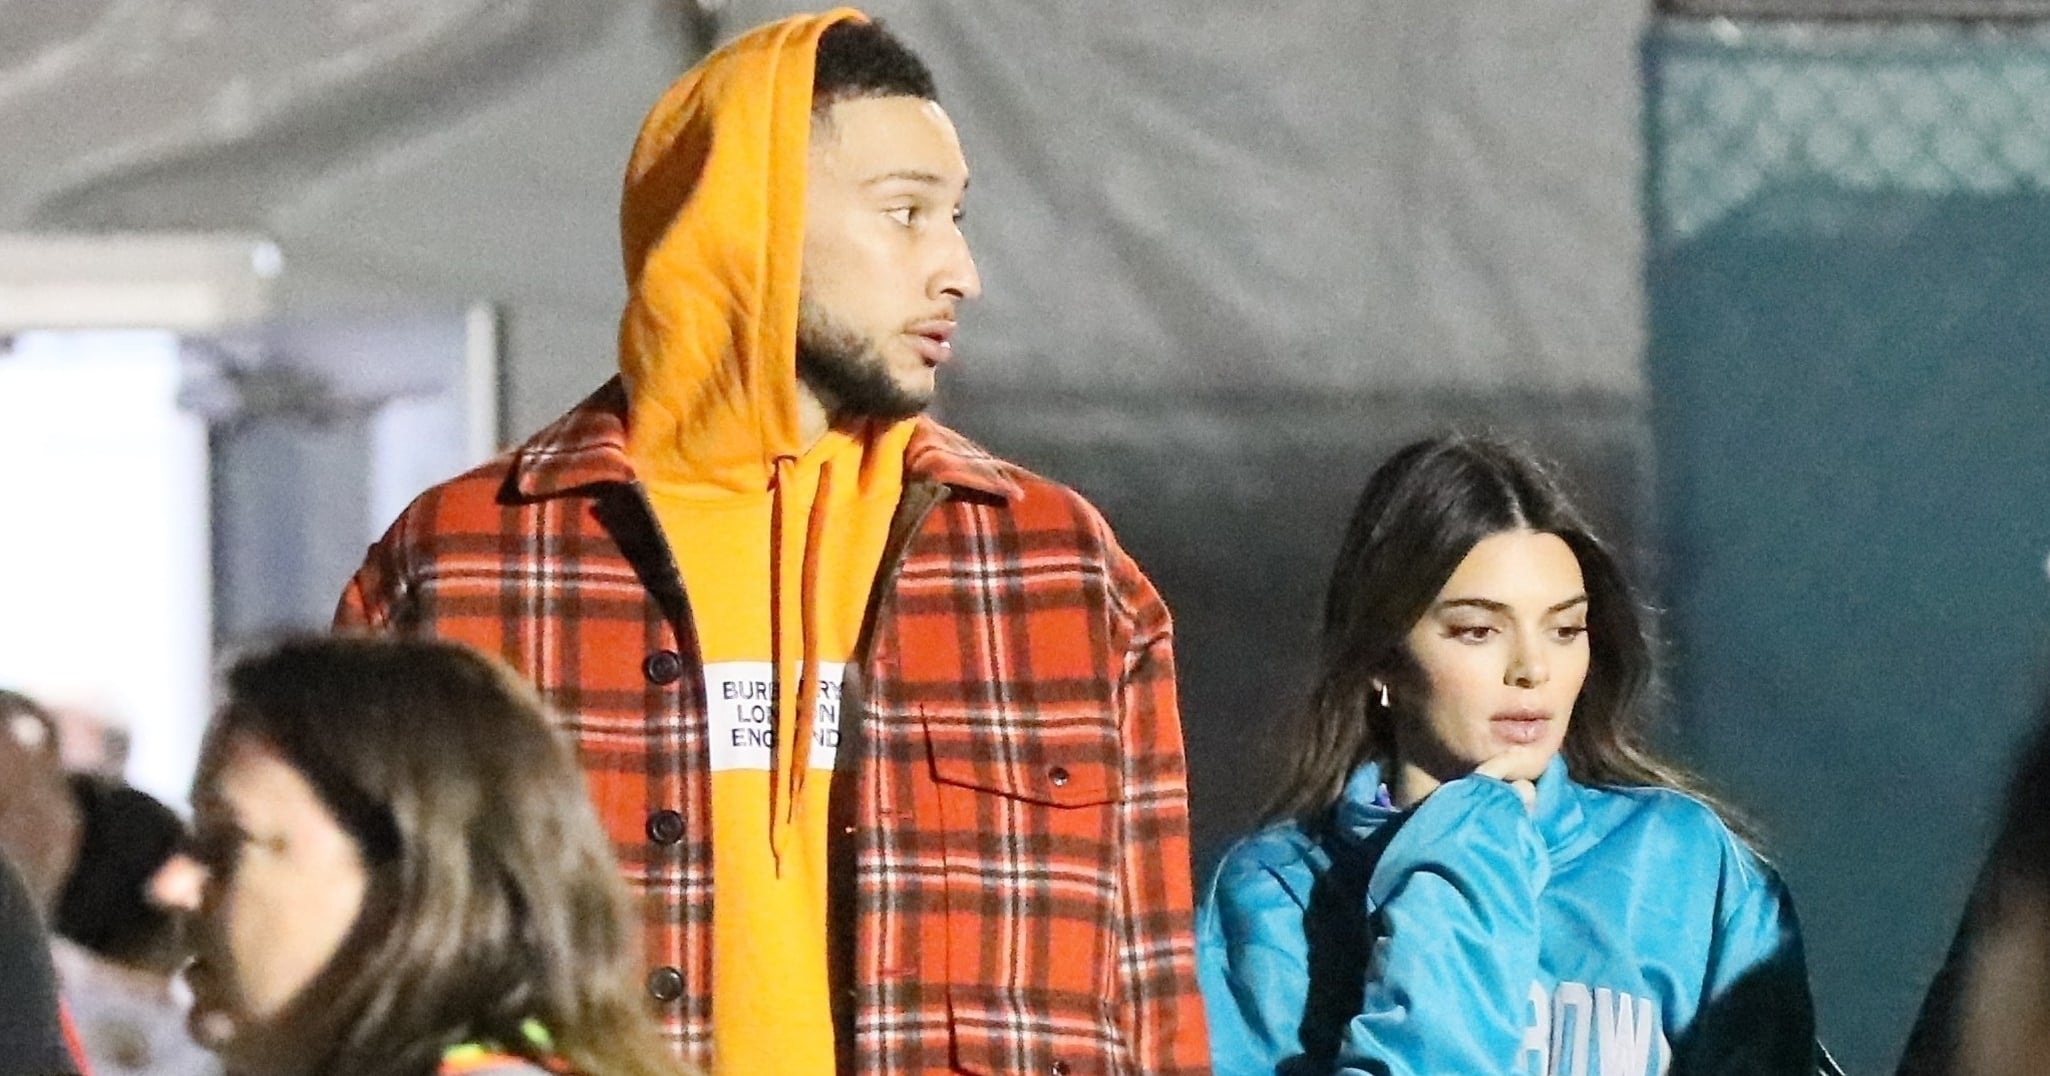 Ben Simmons Outfit from January 22, 2020, WHAT'S ON THE STAR?